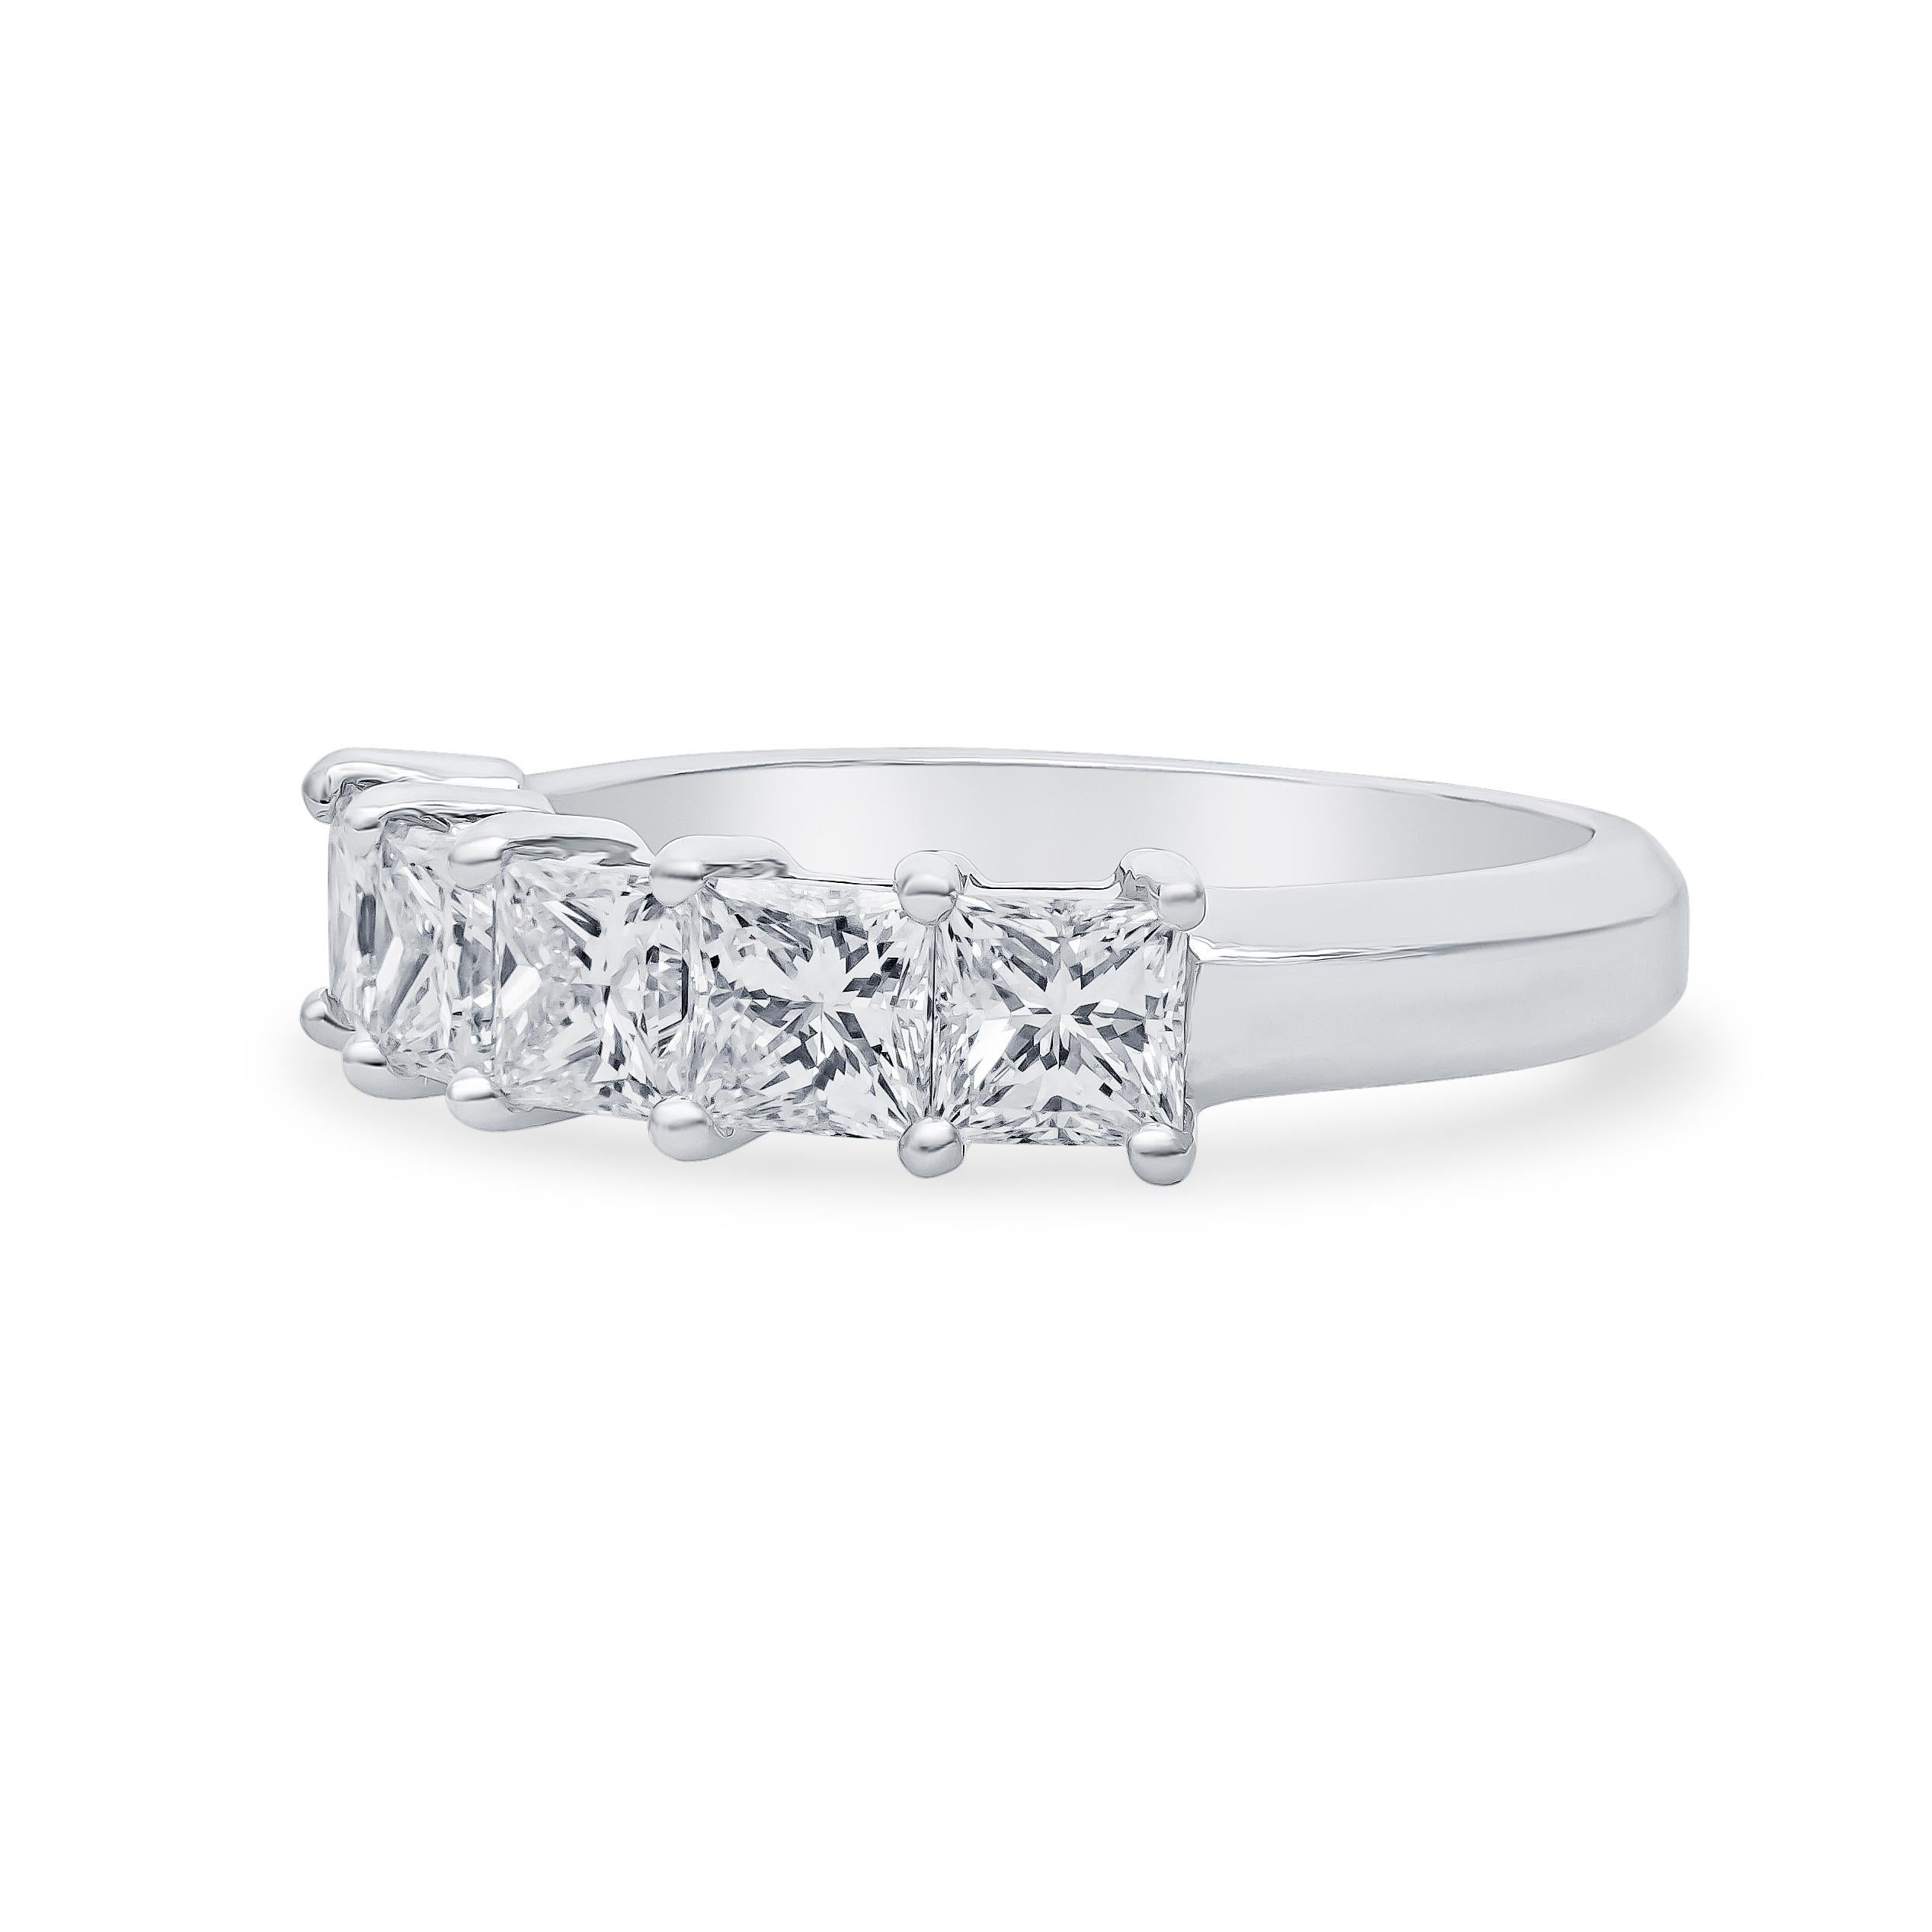 Approximately 1.75 carats total of five princess cut natural diamonds set in a platinum wedding band, size. This timeless design can be paired with your engagement ring or worn alone as a statement piece. It is currently a size 6.5 and may be easily